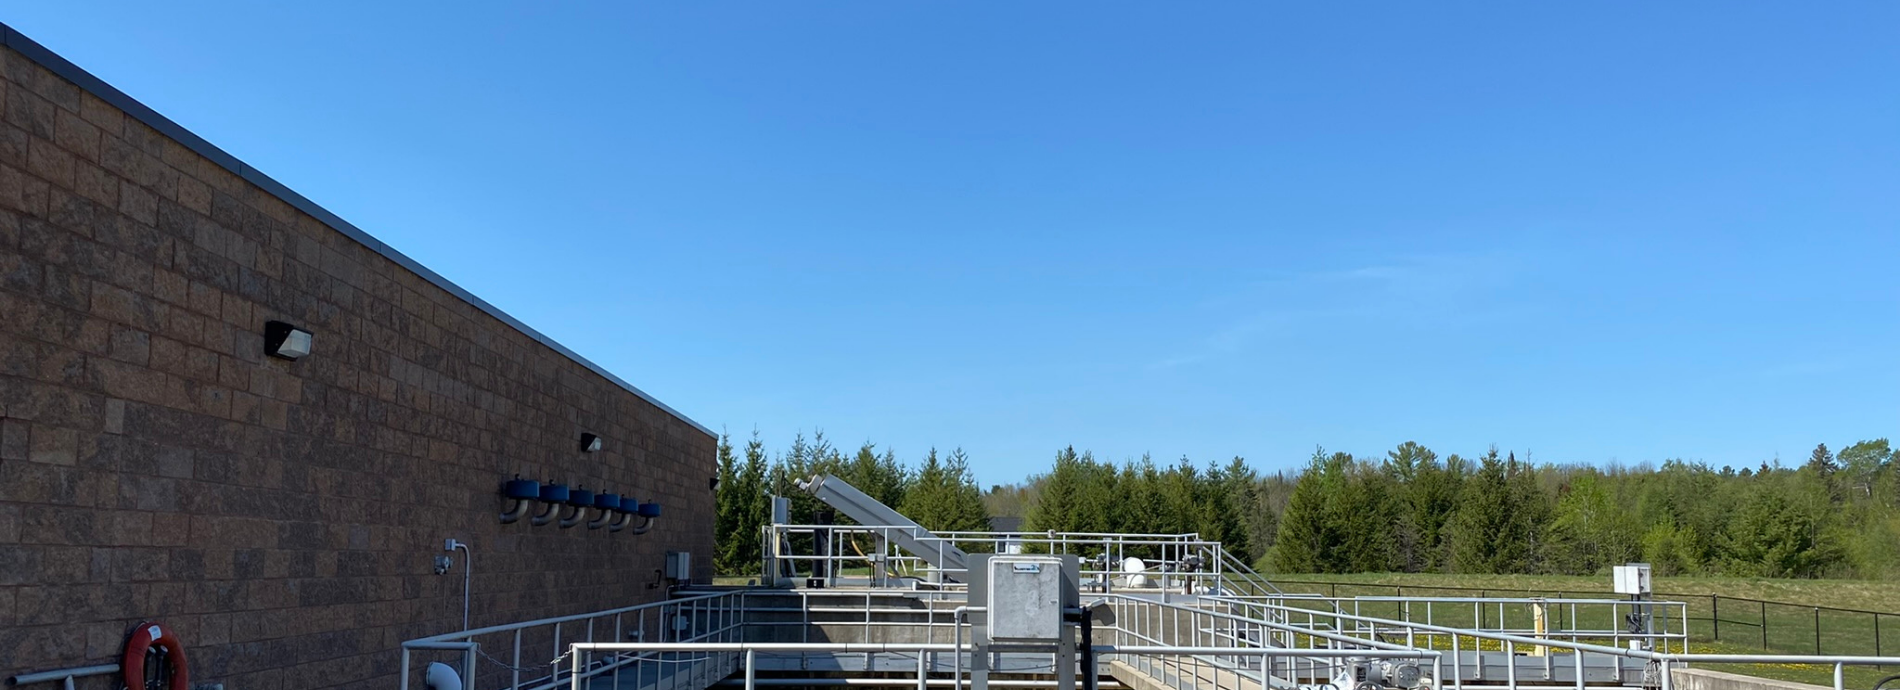 Exterior of Westshore Water and Wastewater Treatment Plant